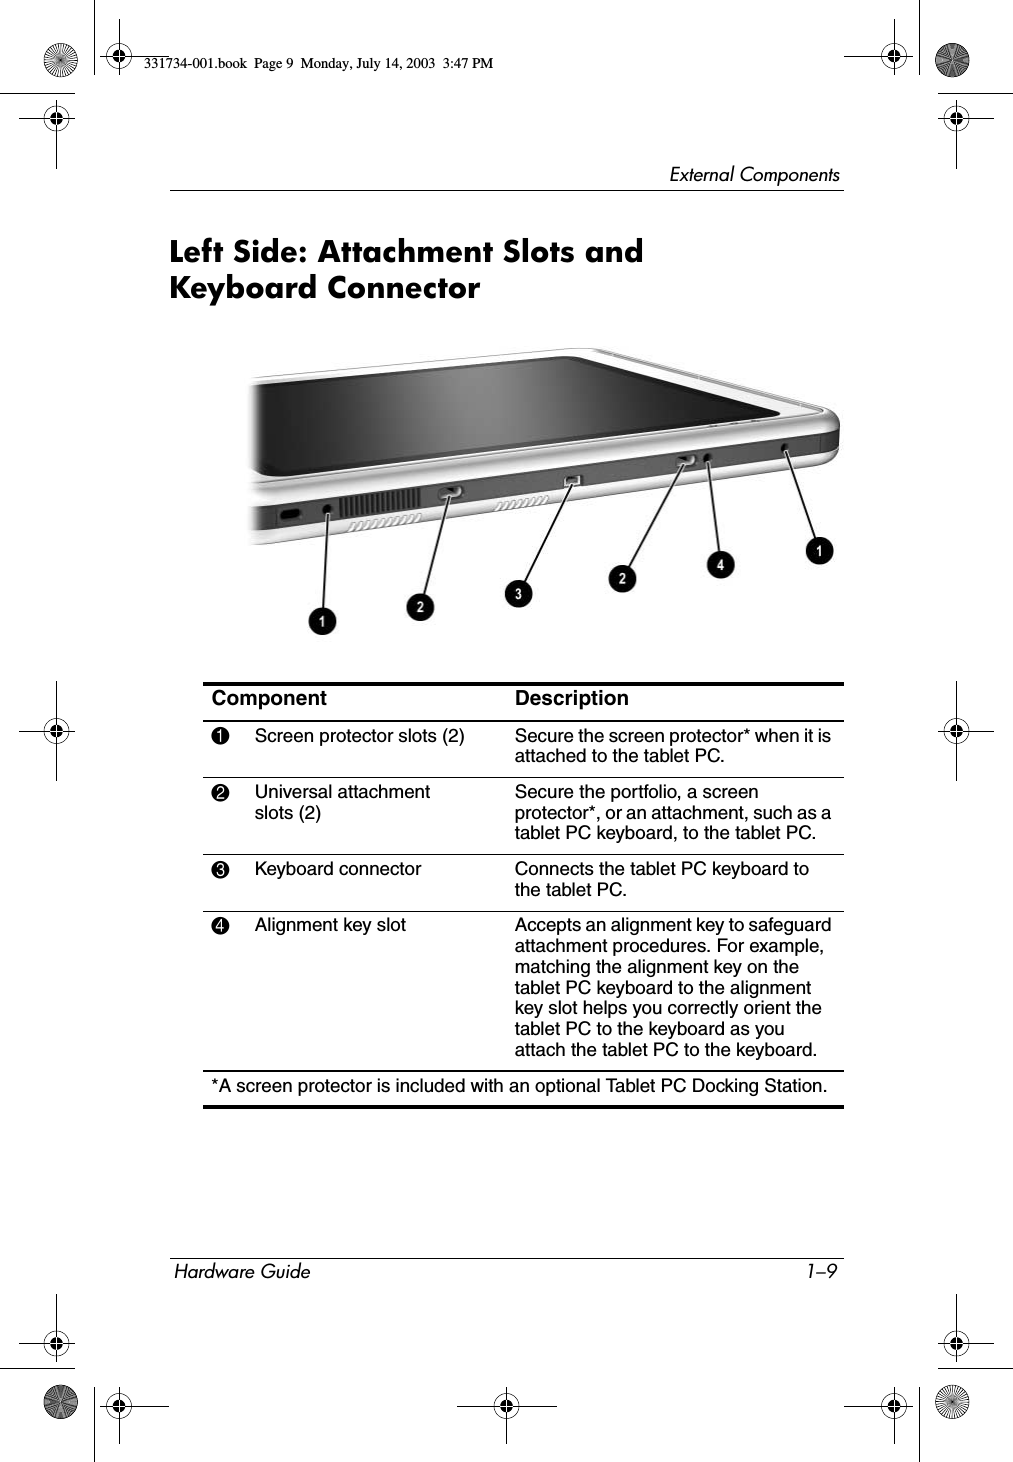 External ComponentsHardware Guide 1–9Left Side: Attachment Slots and Keyboard ConnectorComponent Description1Screen protector slots (2) Secure the screen protector* when it is attached to the tablet PC.2Universal attachment slots (2)Secure the portfolio, a screen protector*, or an attachment, such as a tablet PC keyboard, to the tablet PC.3Keyboard connector Connects the tablet PC keyboard to the tablet PC.4Alignment key slot Accepts an alignment key to safeguard attachment procedures. For example, matching the alignment key on the tablet PC keyboard to the alignment key slot helps you correctly orient the tablet PC to the keyboard as you attach the tablet PC to the keyboard.*A screen protector is included with an optional Tablet PC Docking Station.331734-001.book  Page 9  Monday, July 14, 2003  3:47 PM